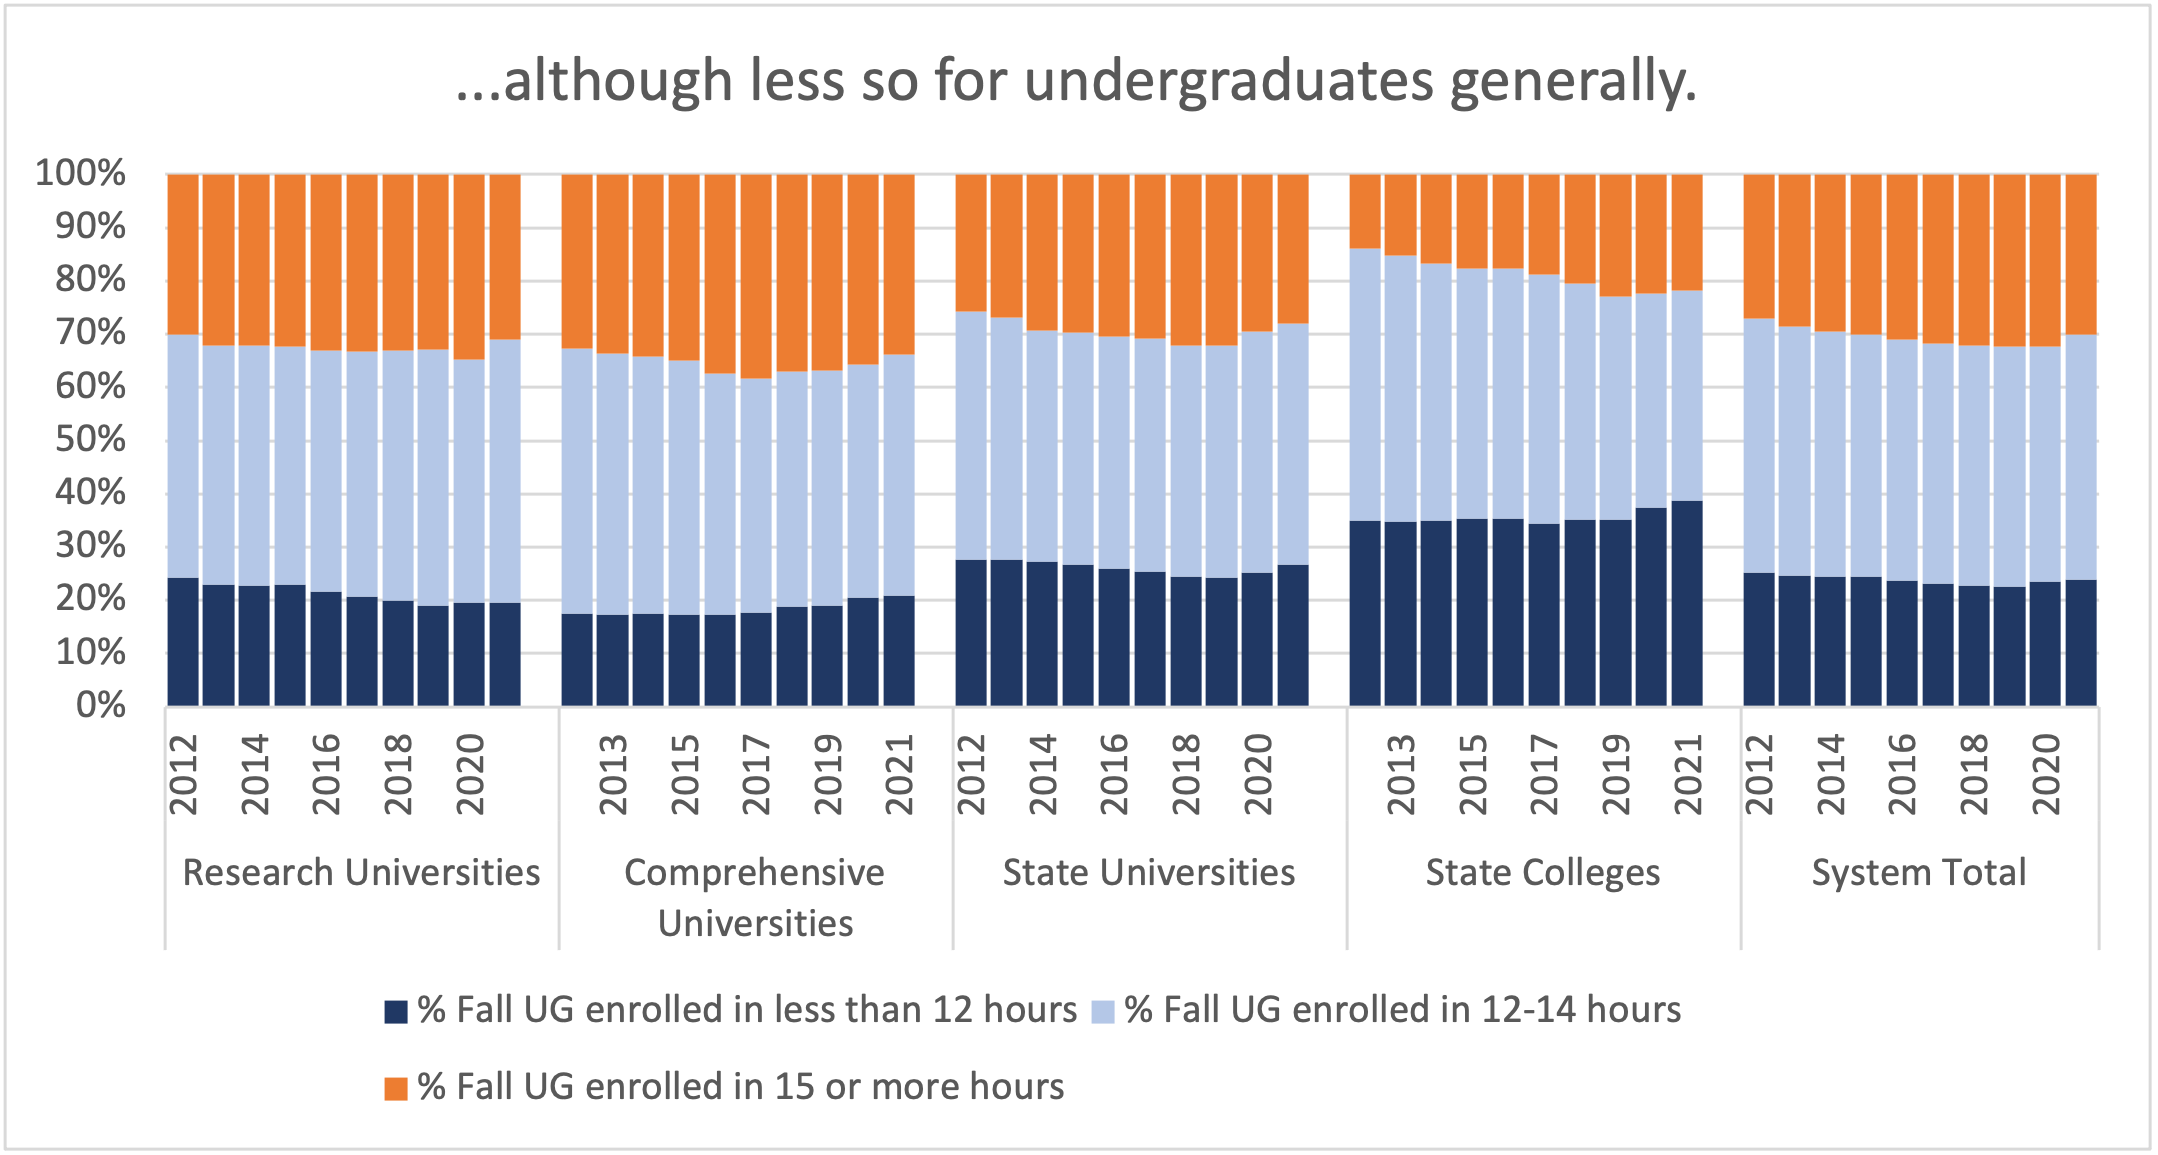 Although more so for FTF than for Undergraduates